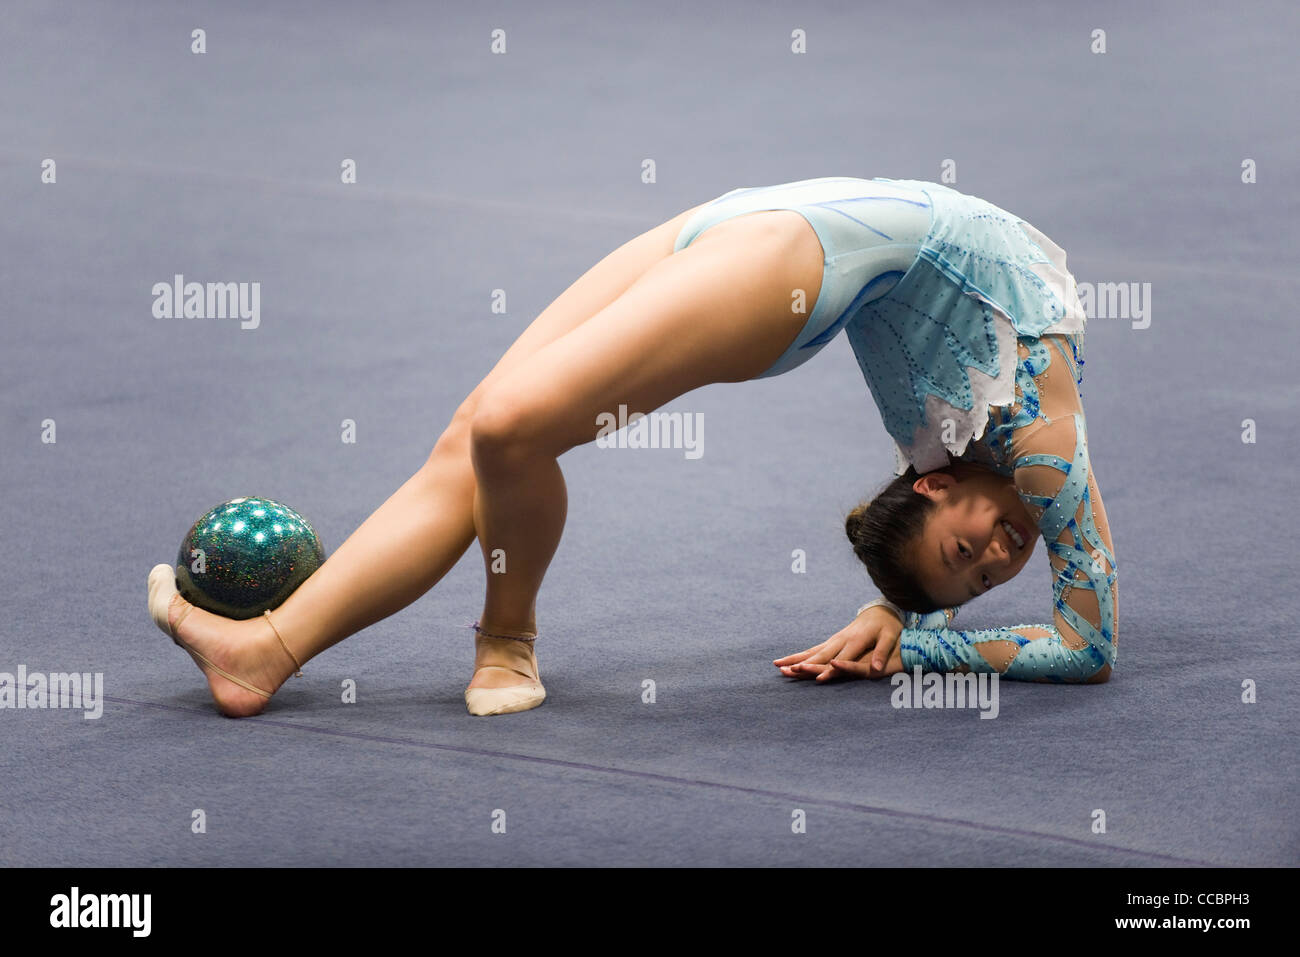 Female gymnast performing floor routine with ball Stock Photo